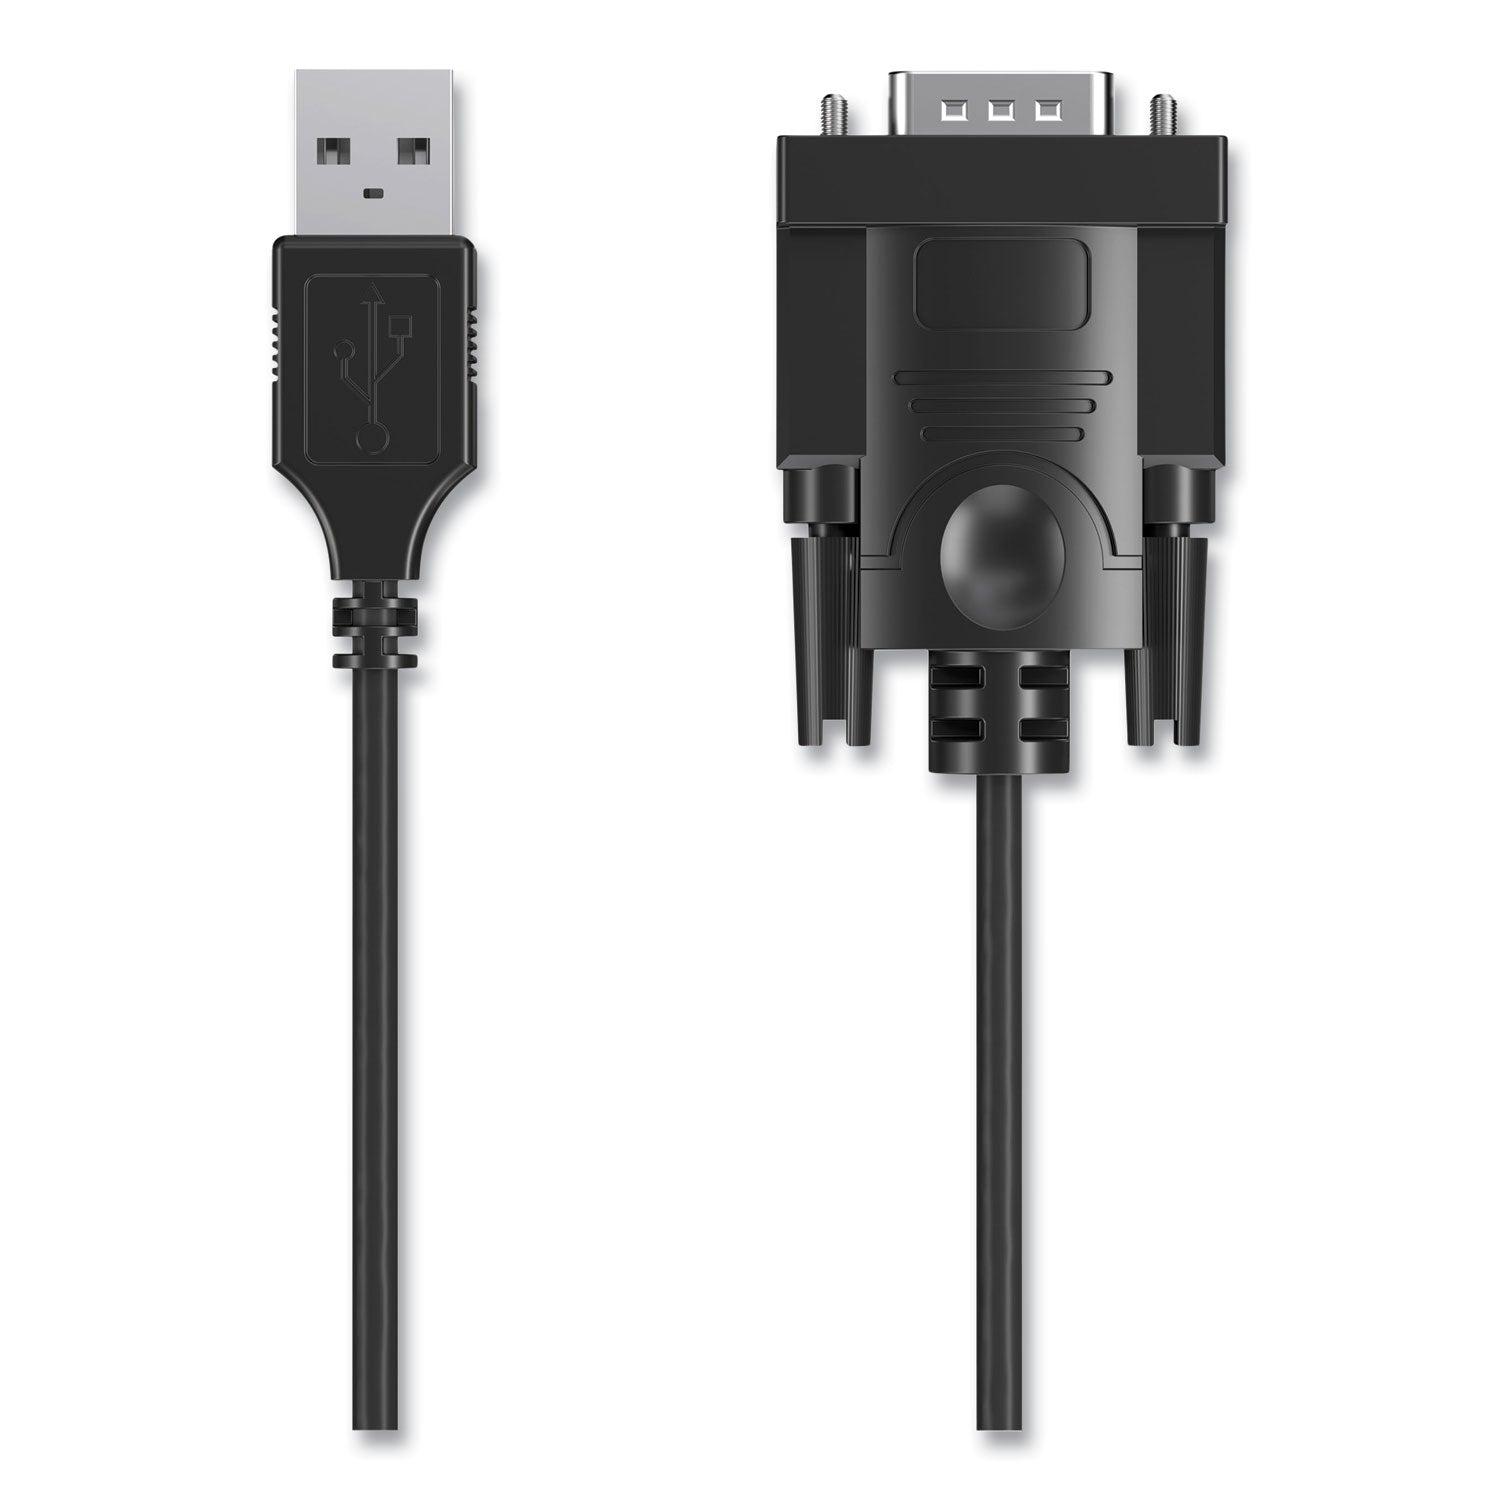 usb-to-serial-adapter-1-ft-black_nxt24400030 - 3